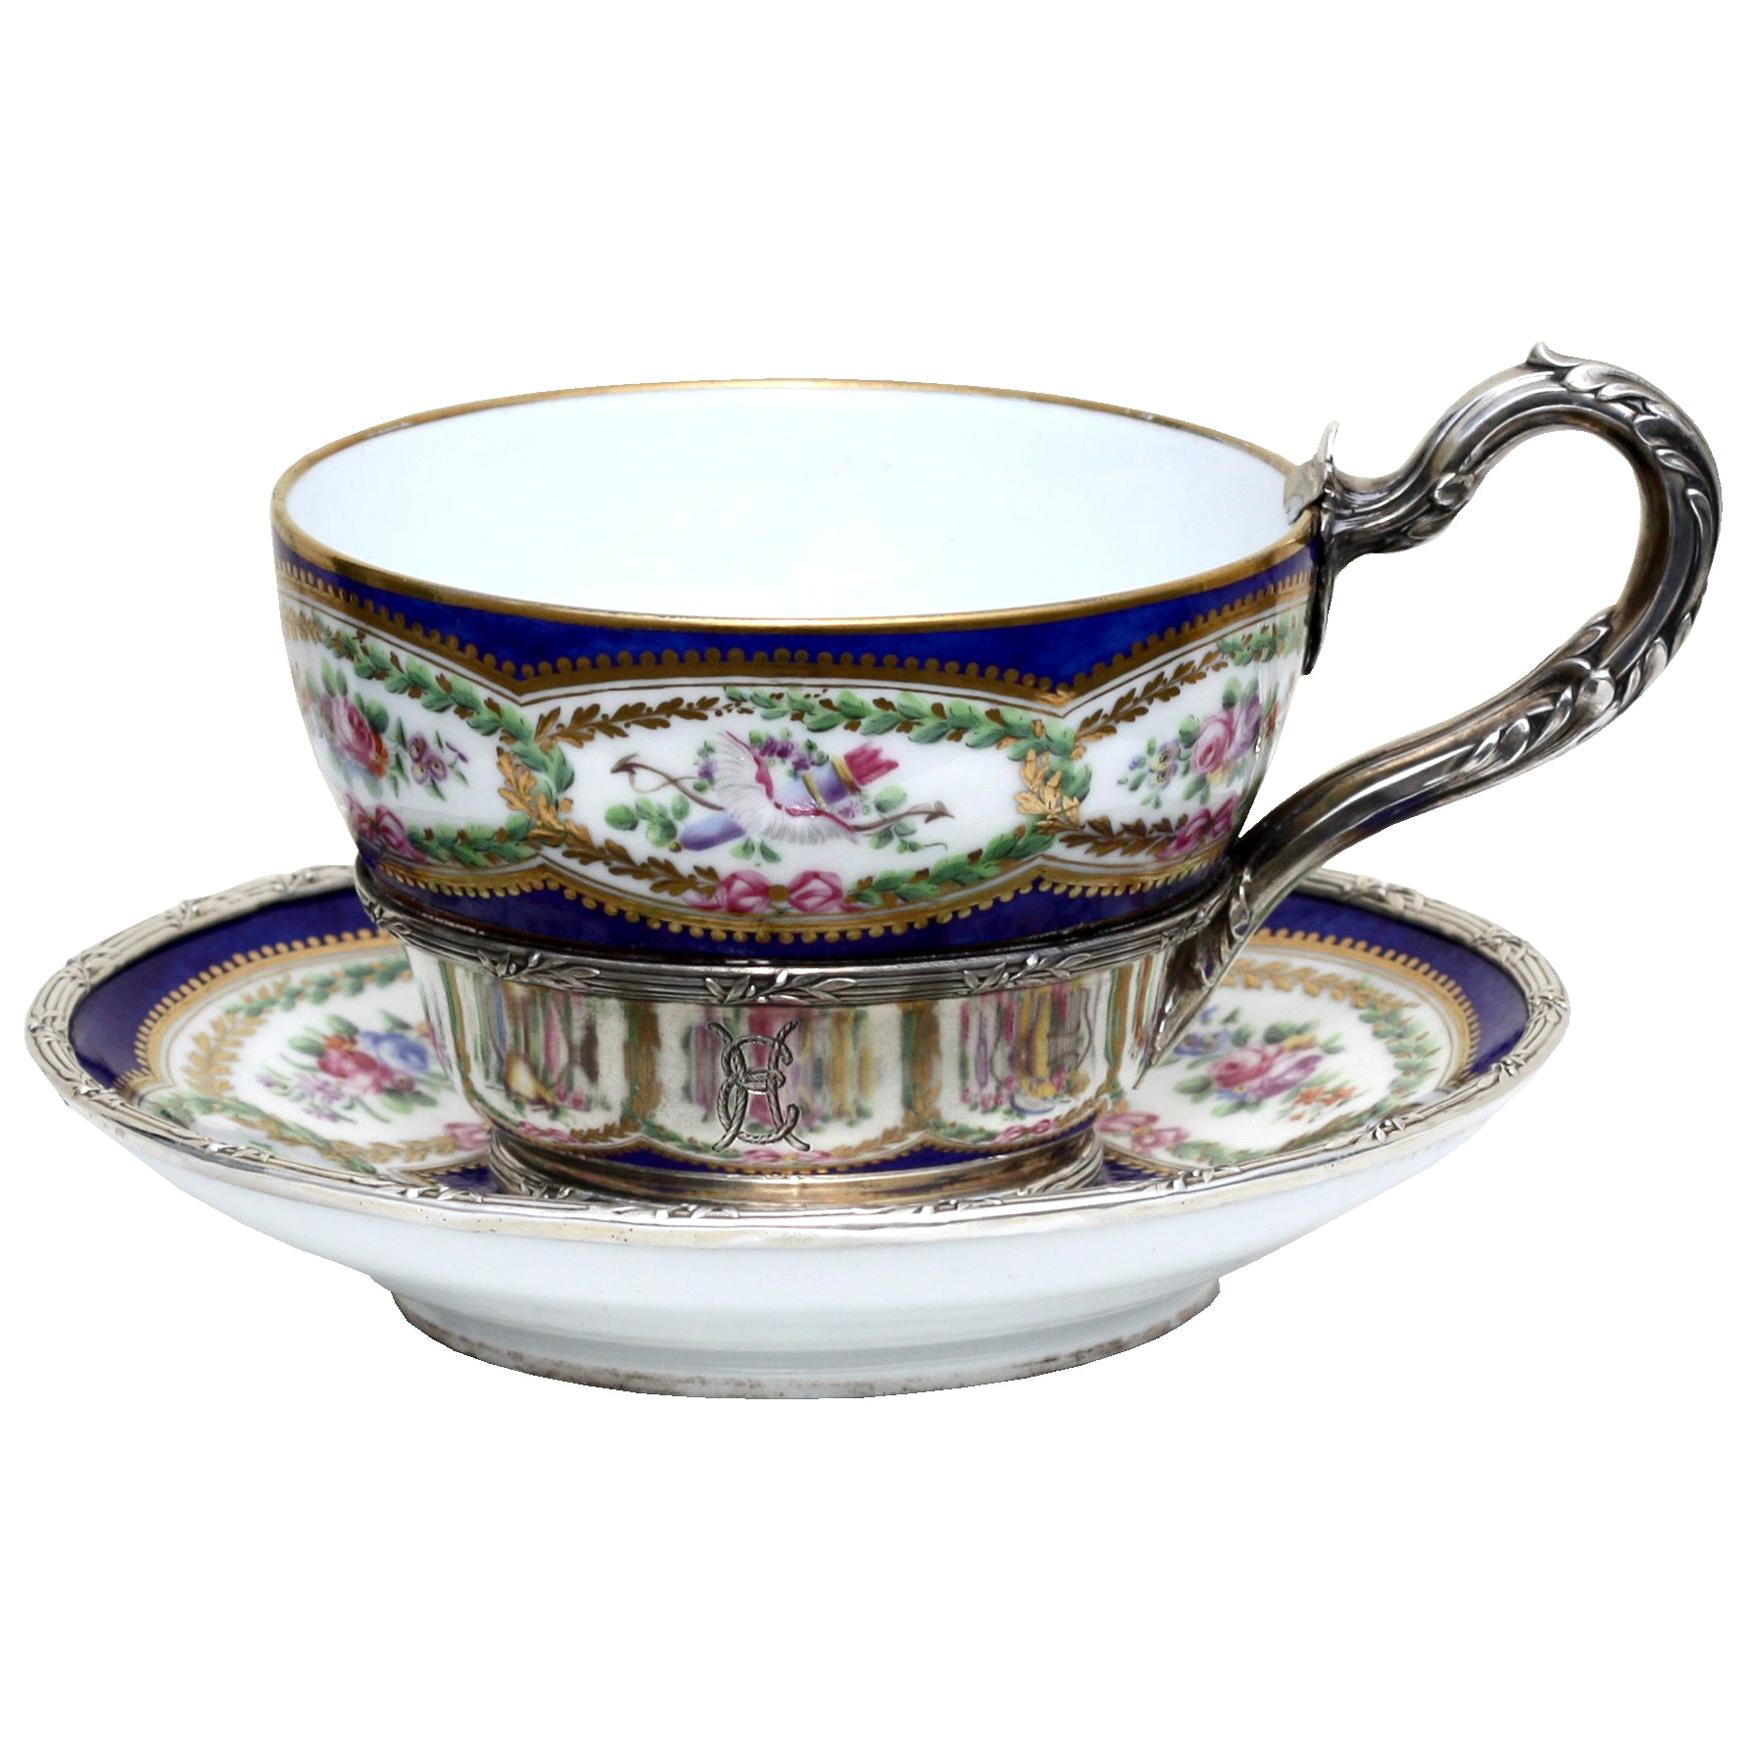 Fine Porcelain Silver Mounted Teacup and Saucer